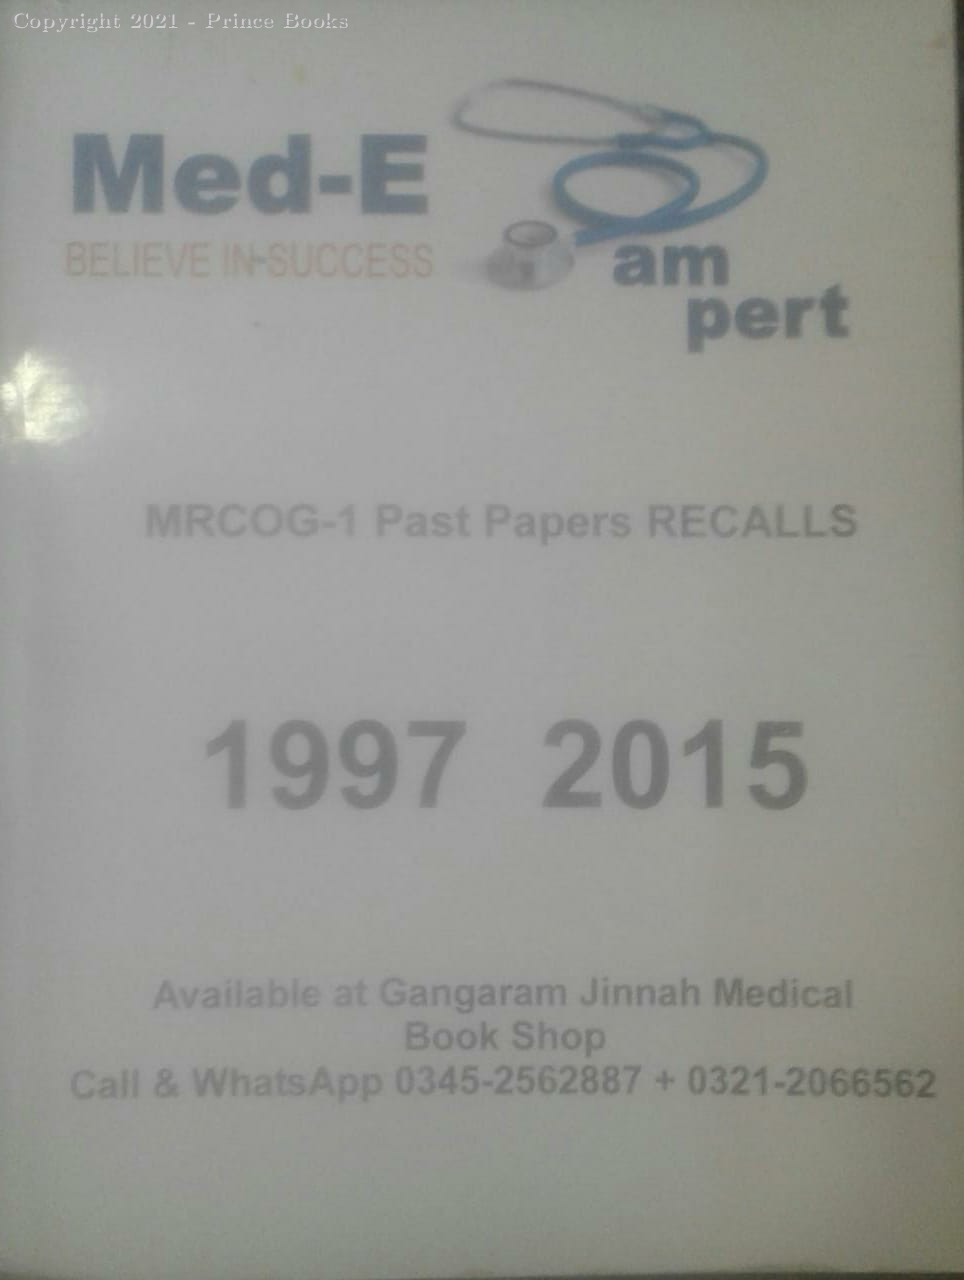 med-e believe insuccess mrcog-1 past papers recalls 1997 2015